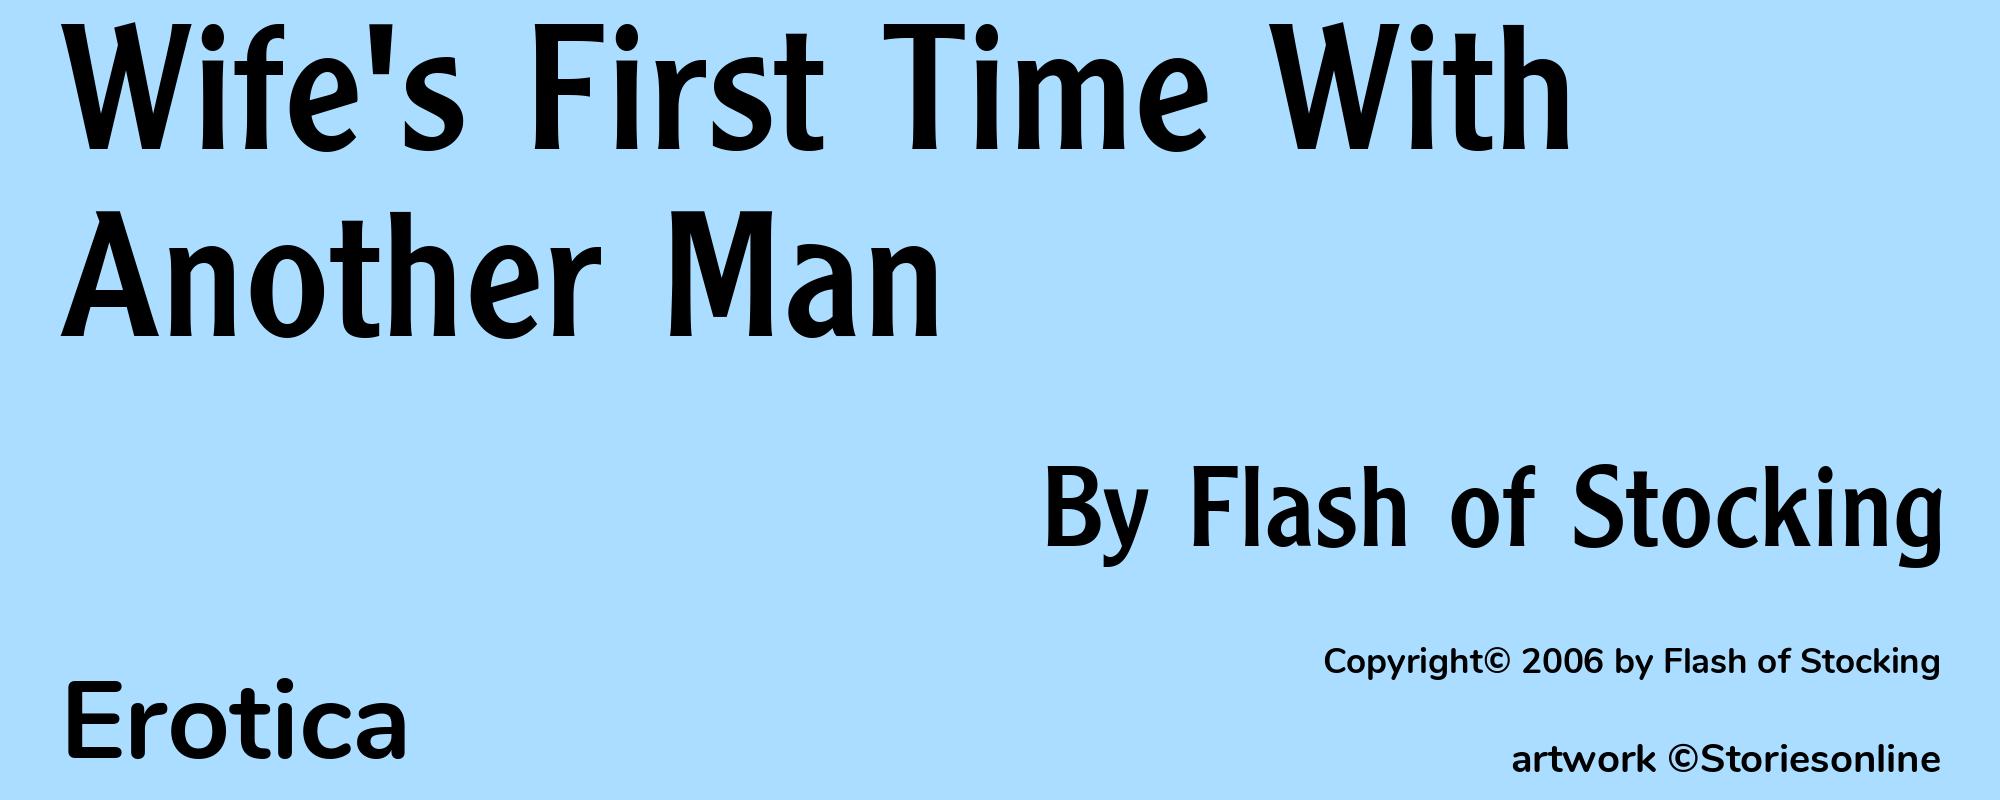 Wife's First Time With Another Man - Cover